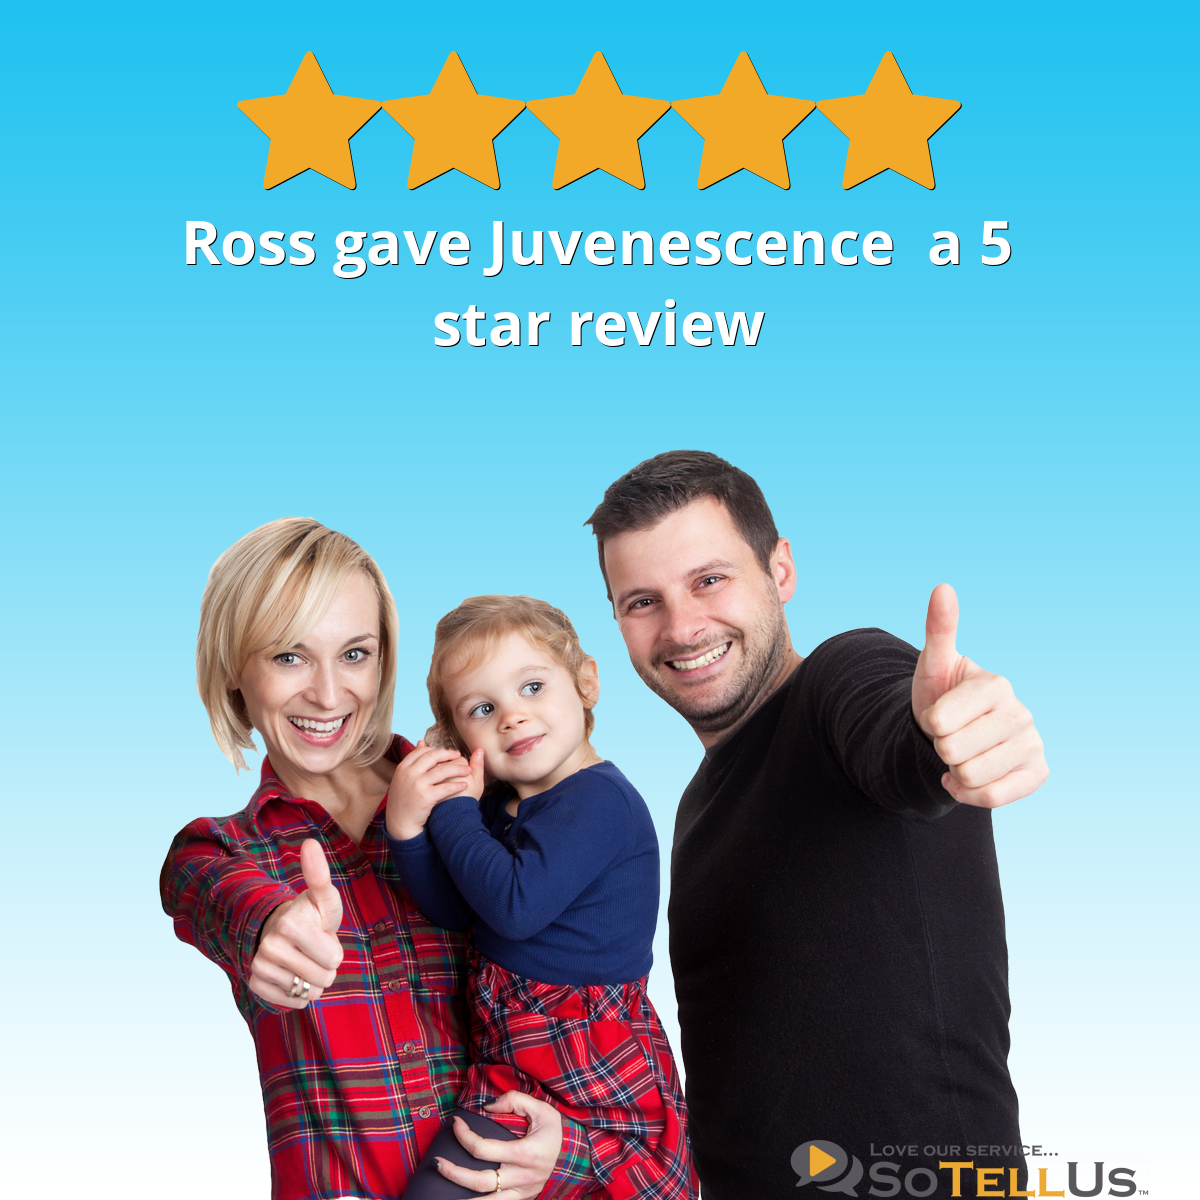 Ross S gave Juvenescence a 5 star review on SoTellUs